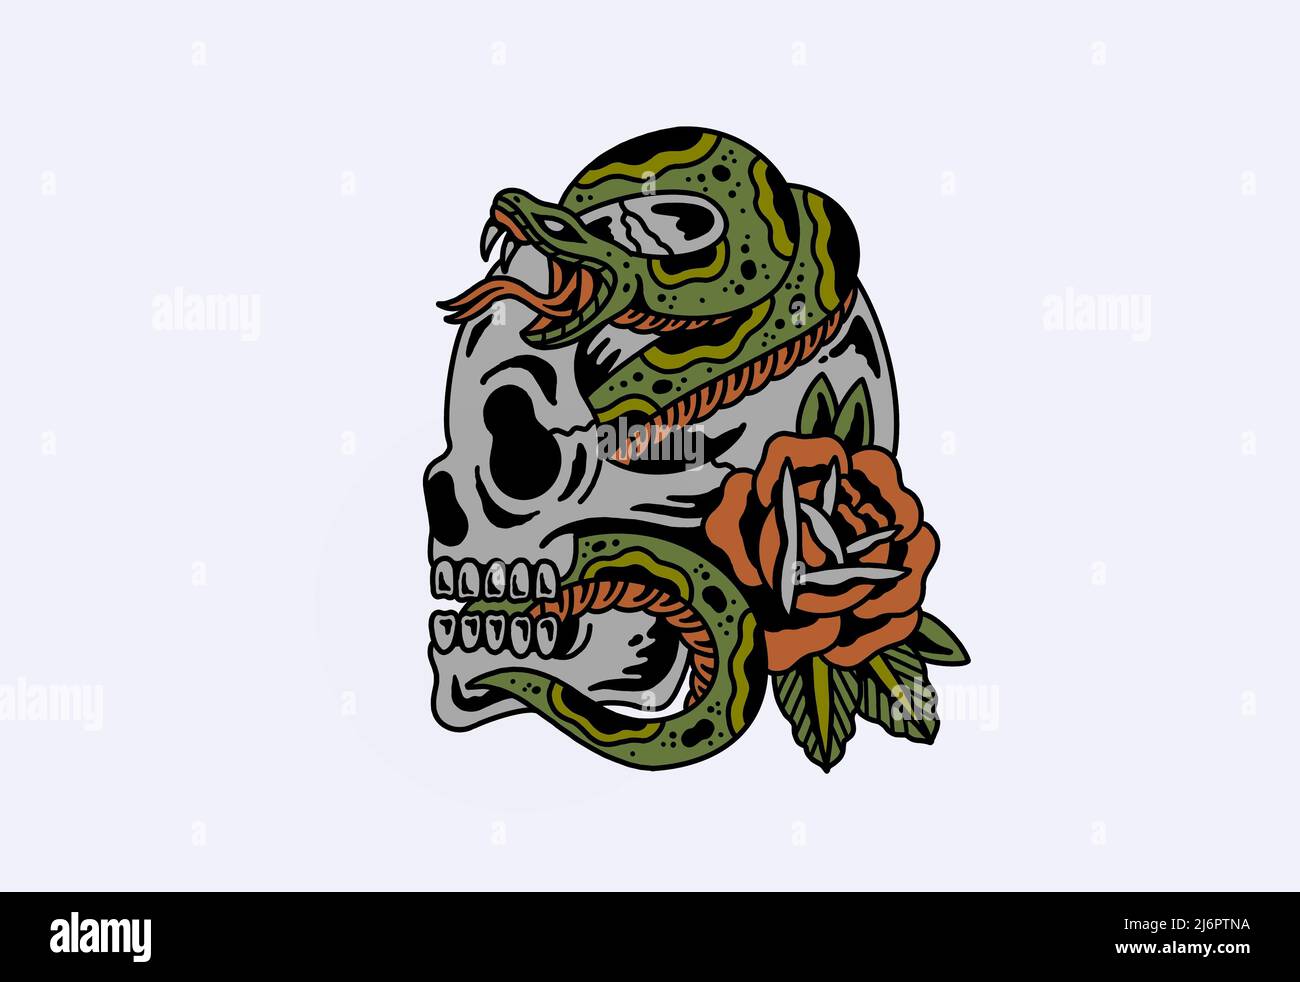 Old school tattoo style inspired graphic design snake, skull and rose Stock Photo